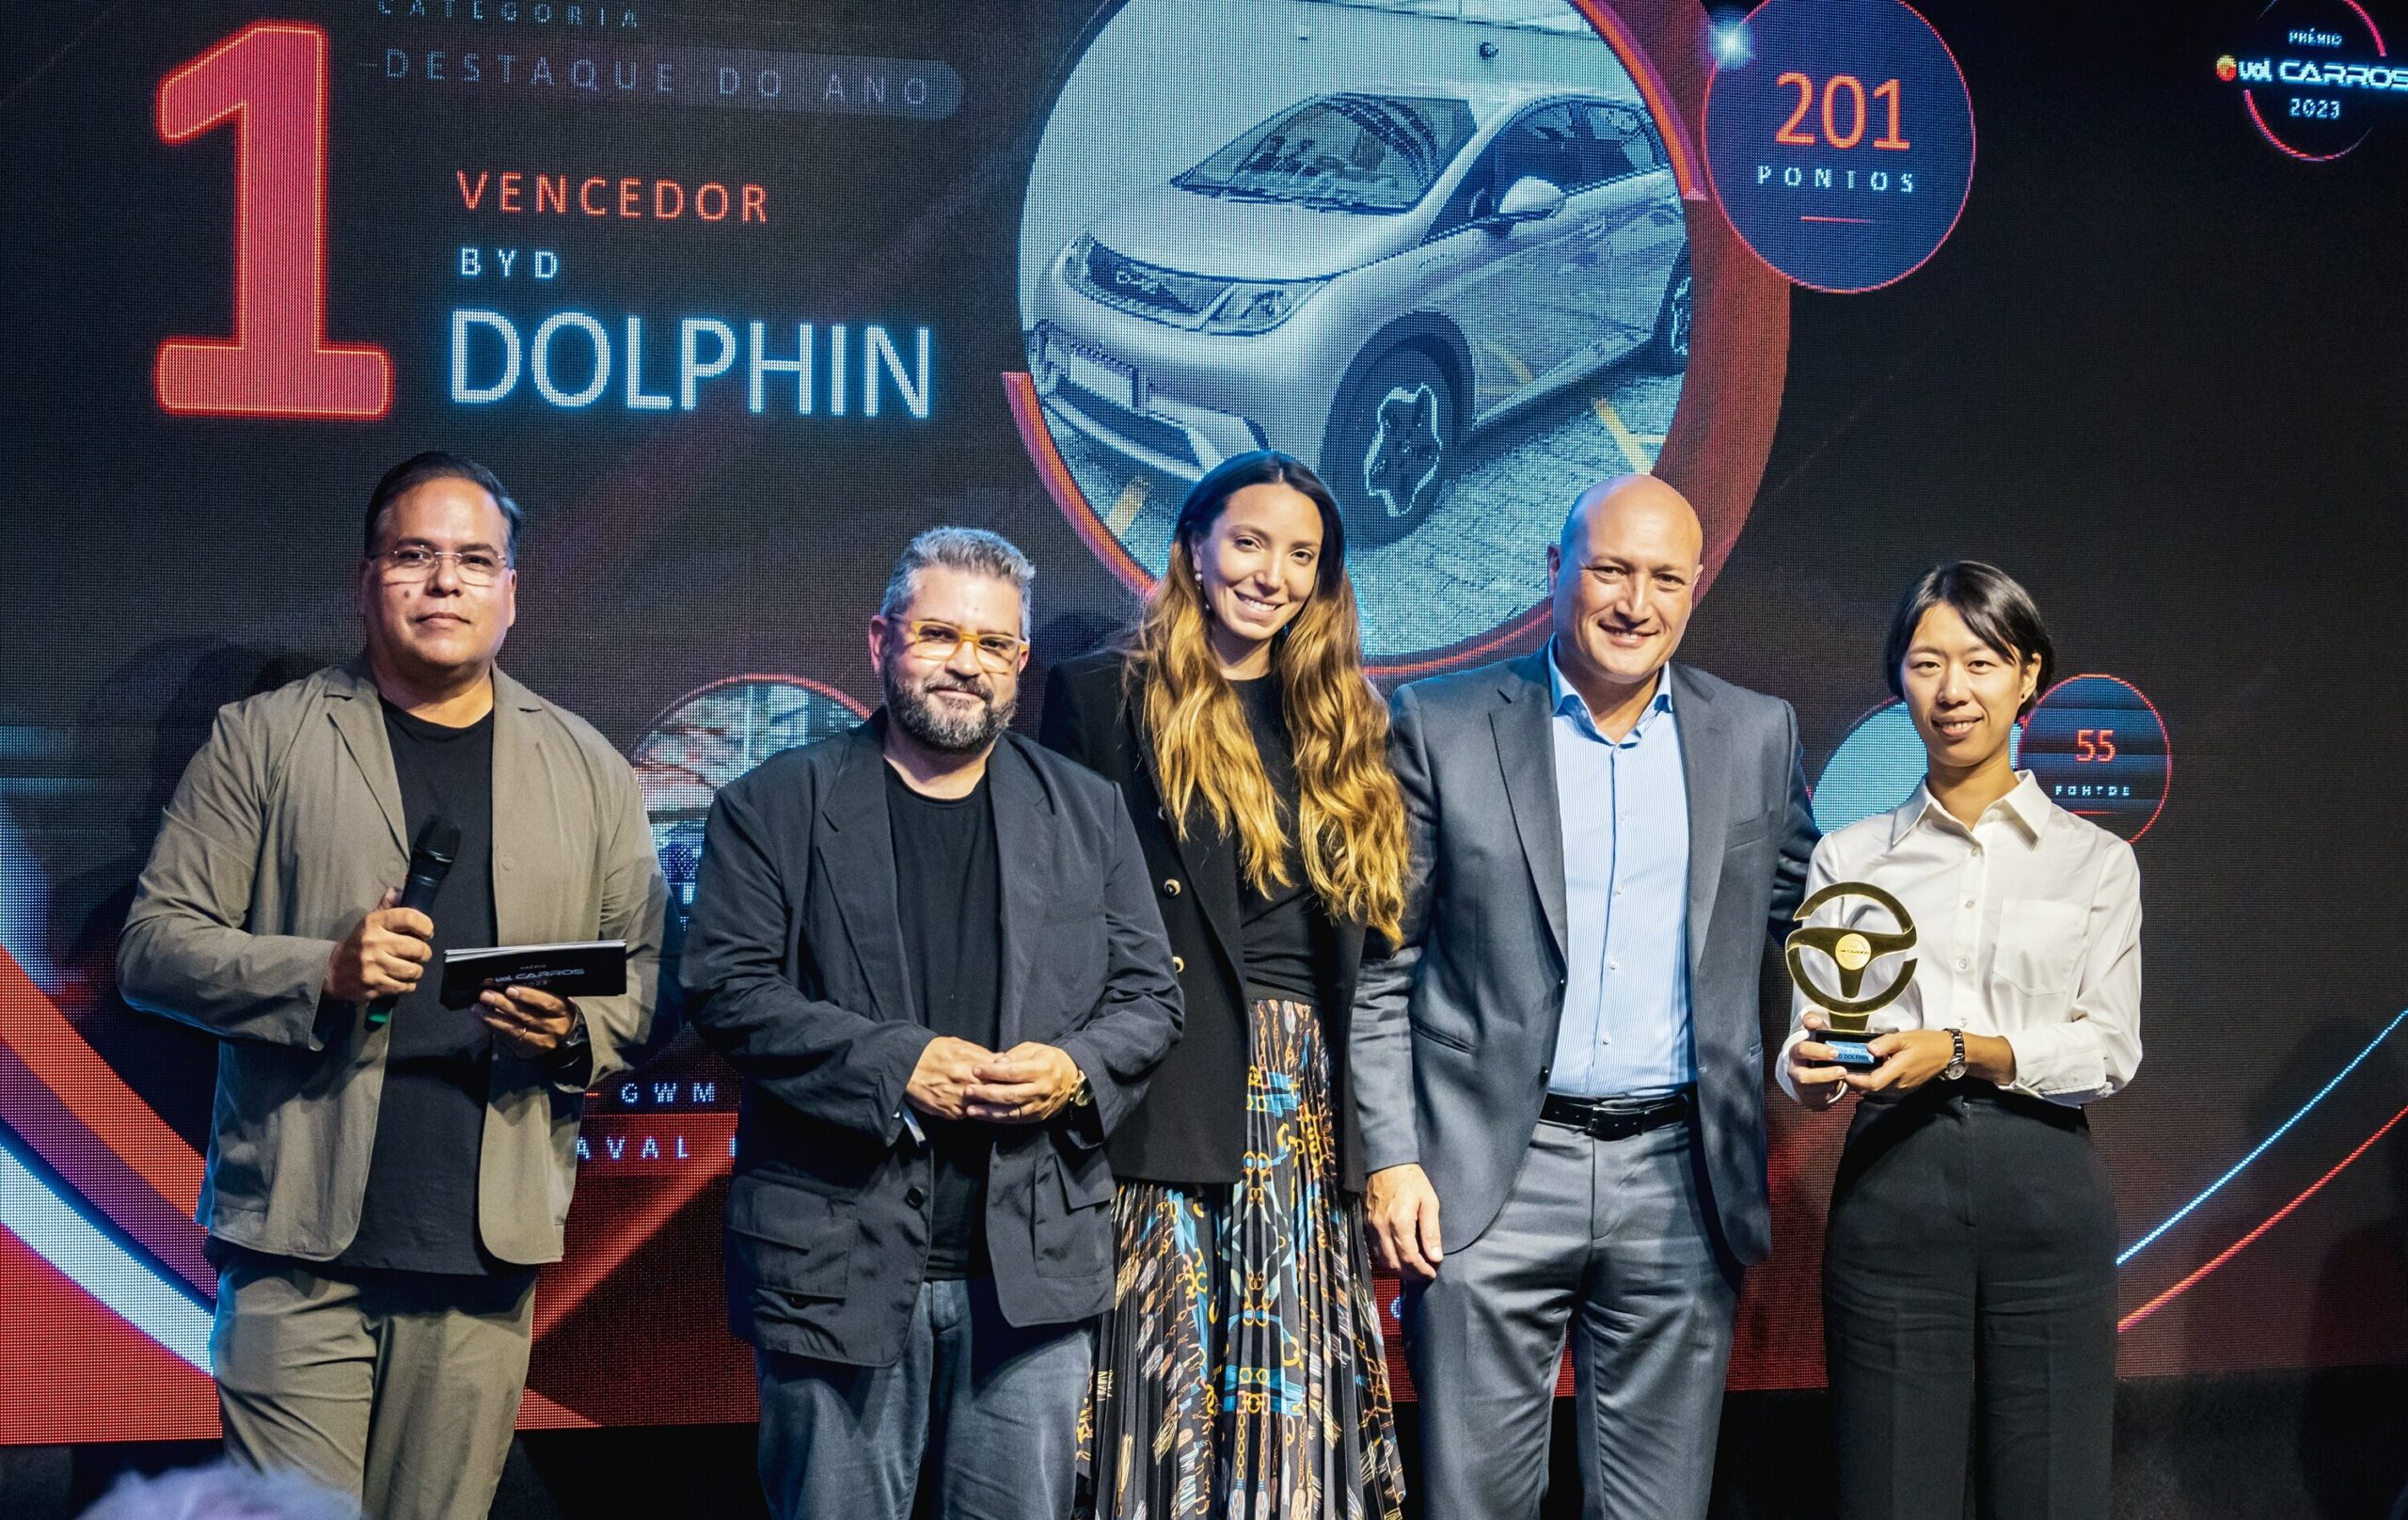 BYD DOLPHIN is the most awarded Electric Car in Brazil in 2023